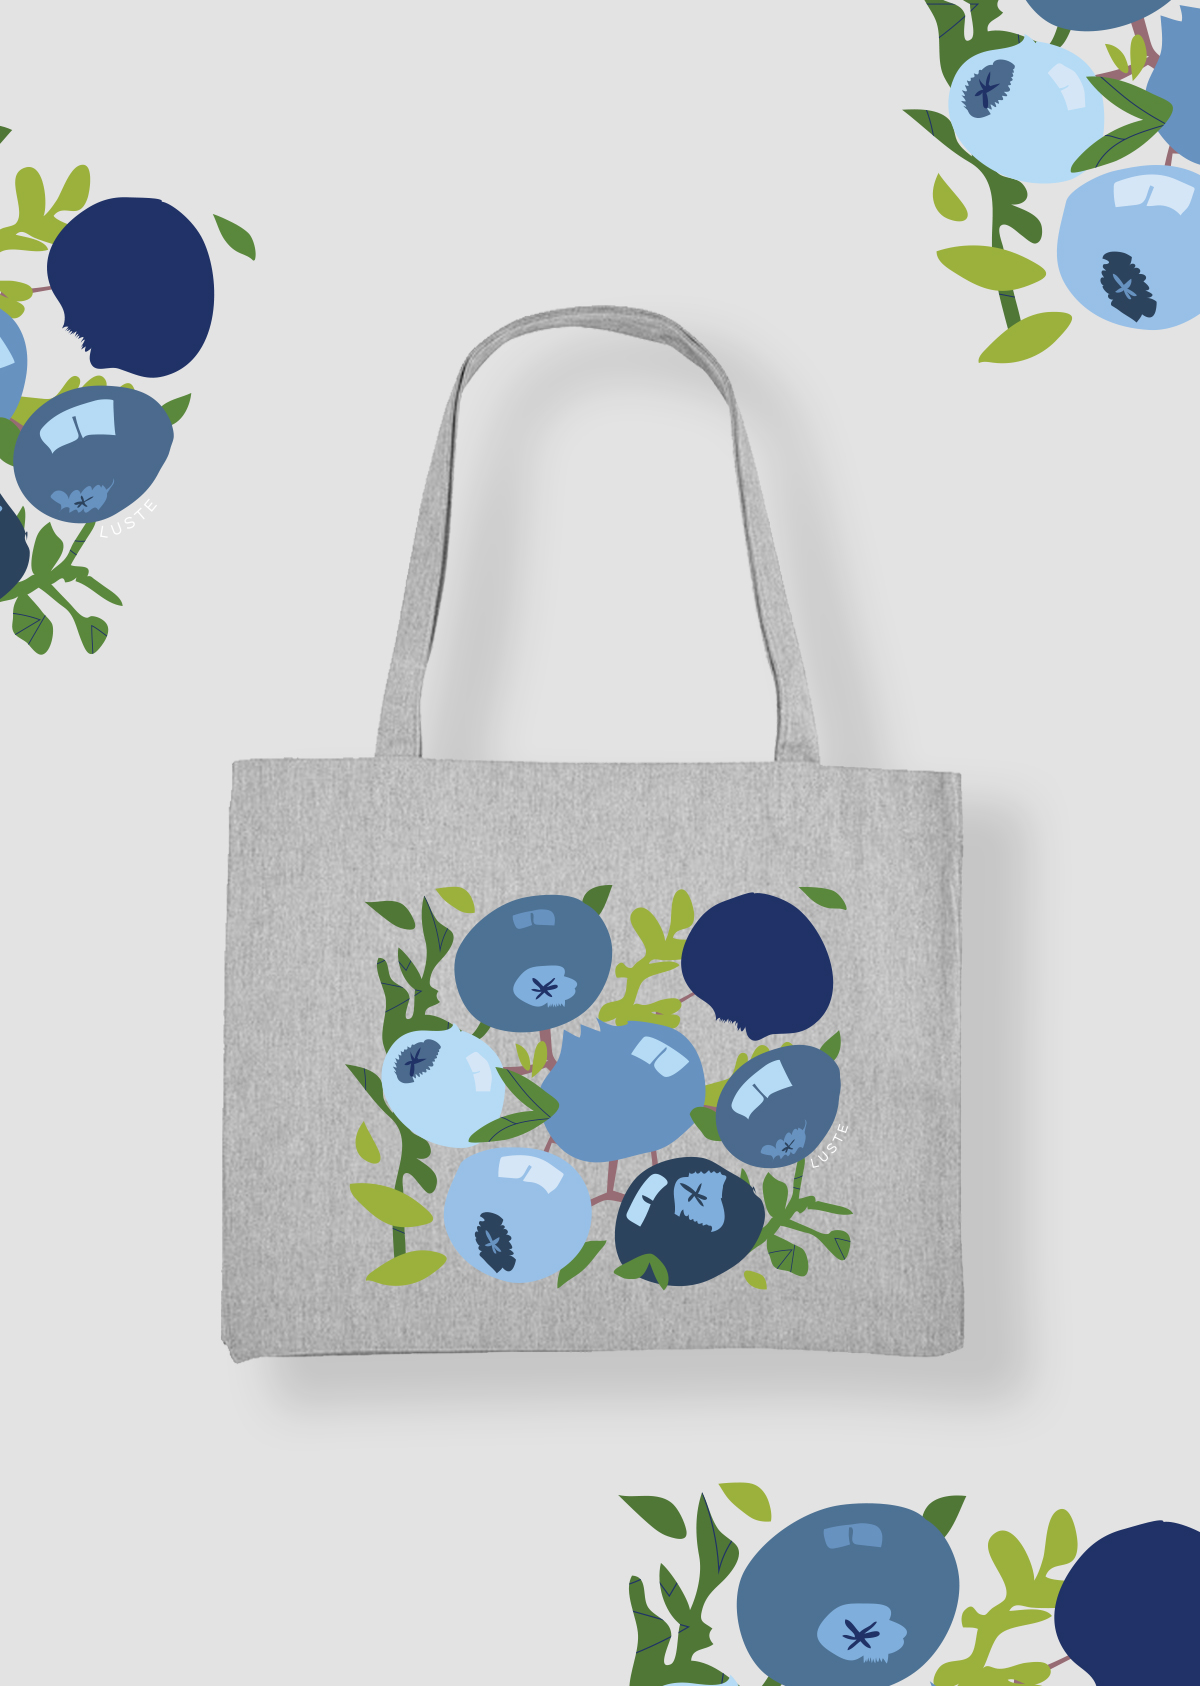 Tote Bag “Blueberry”